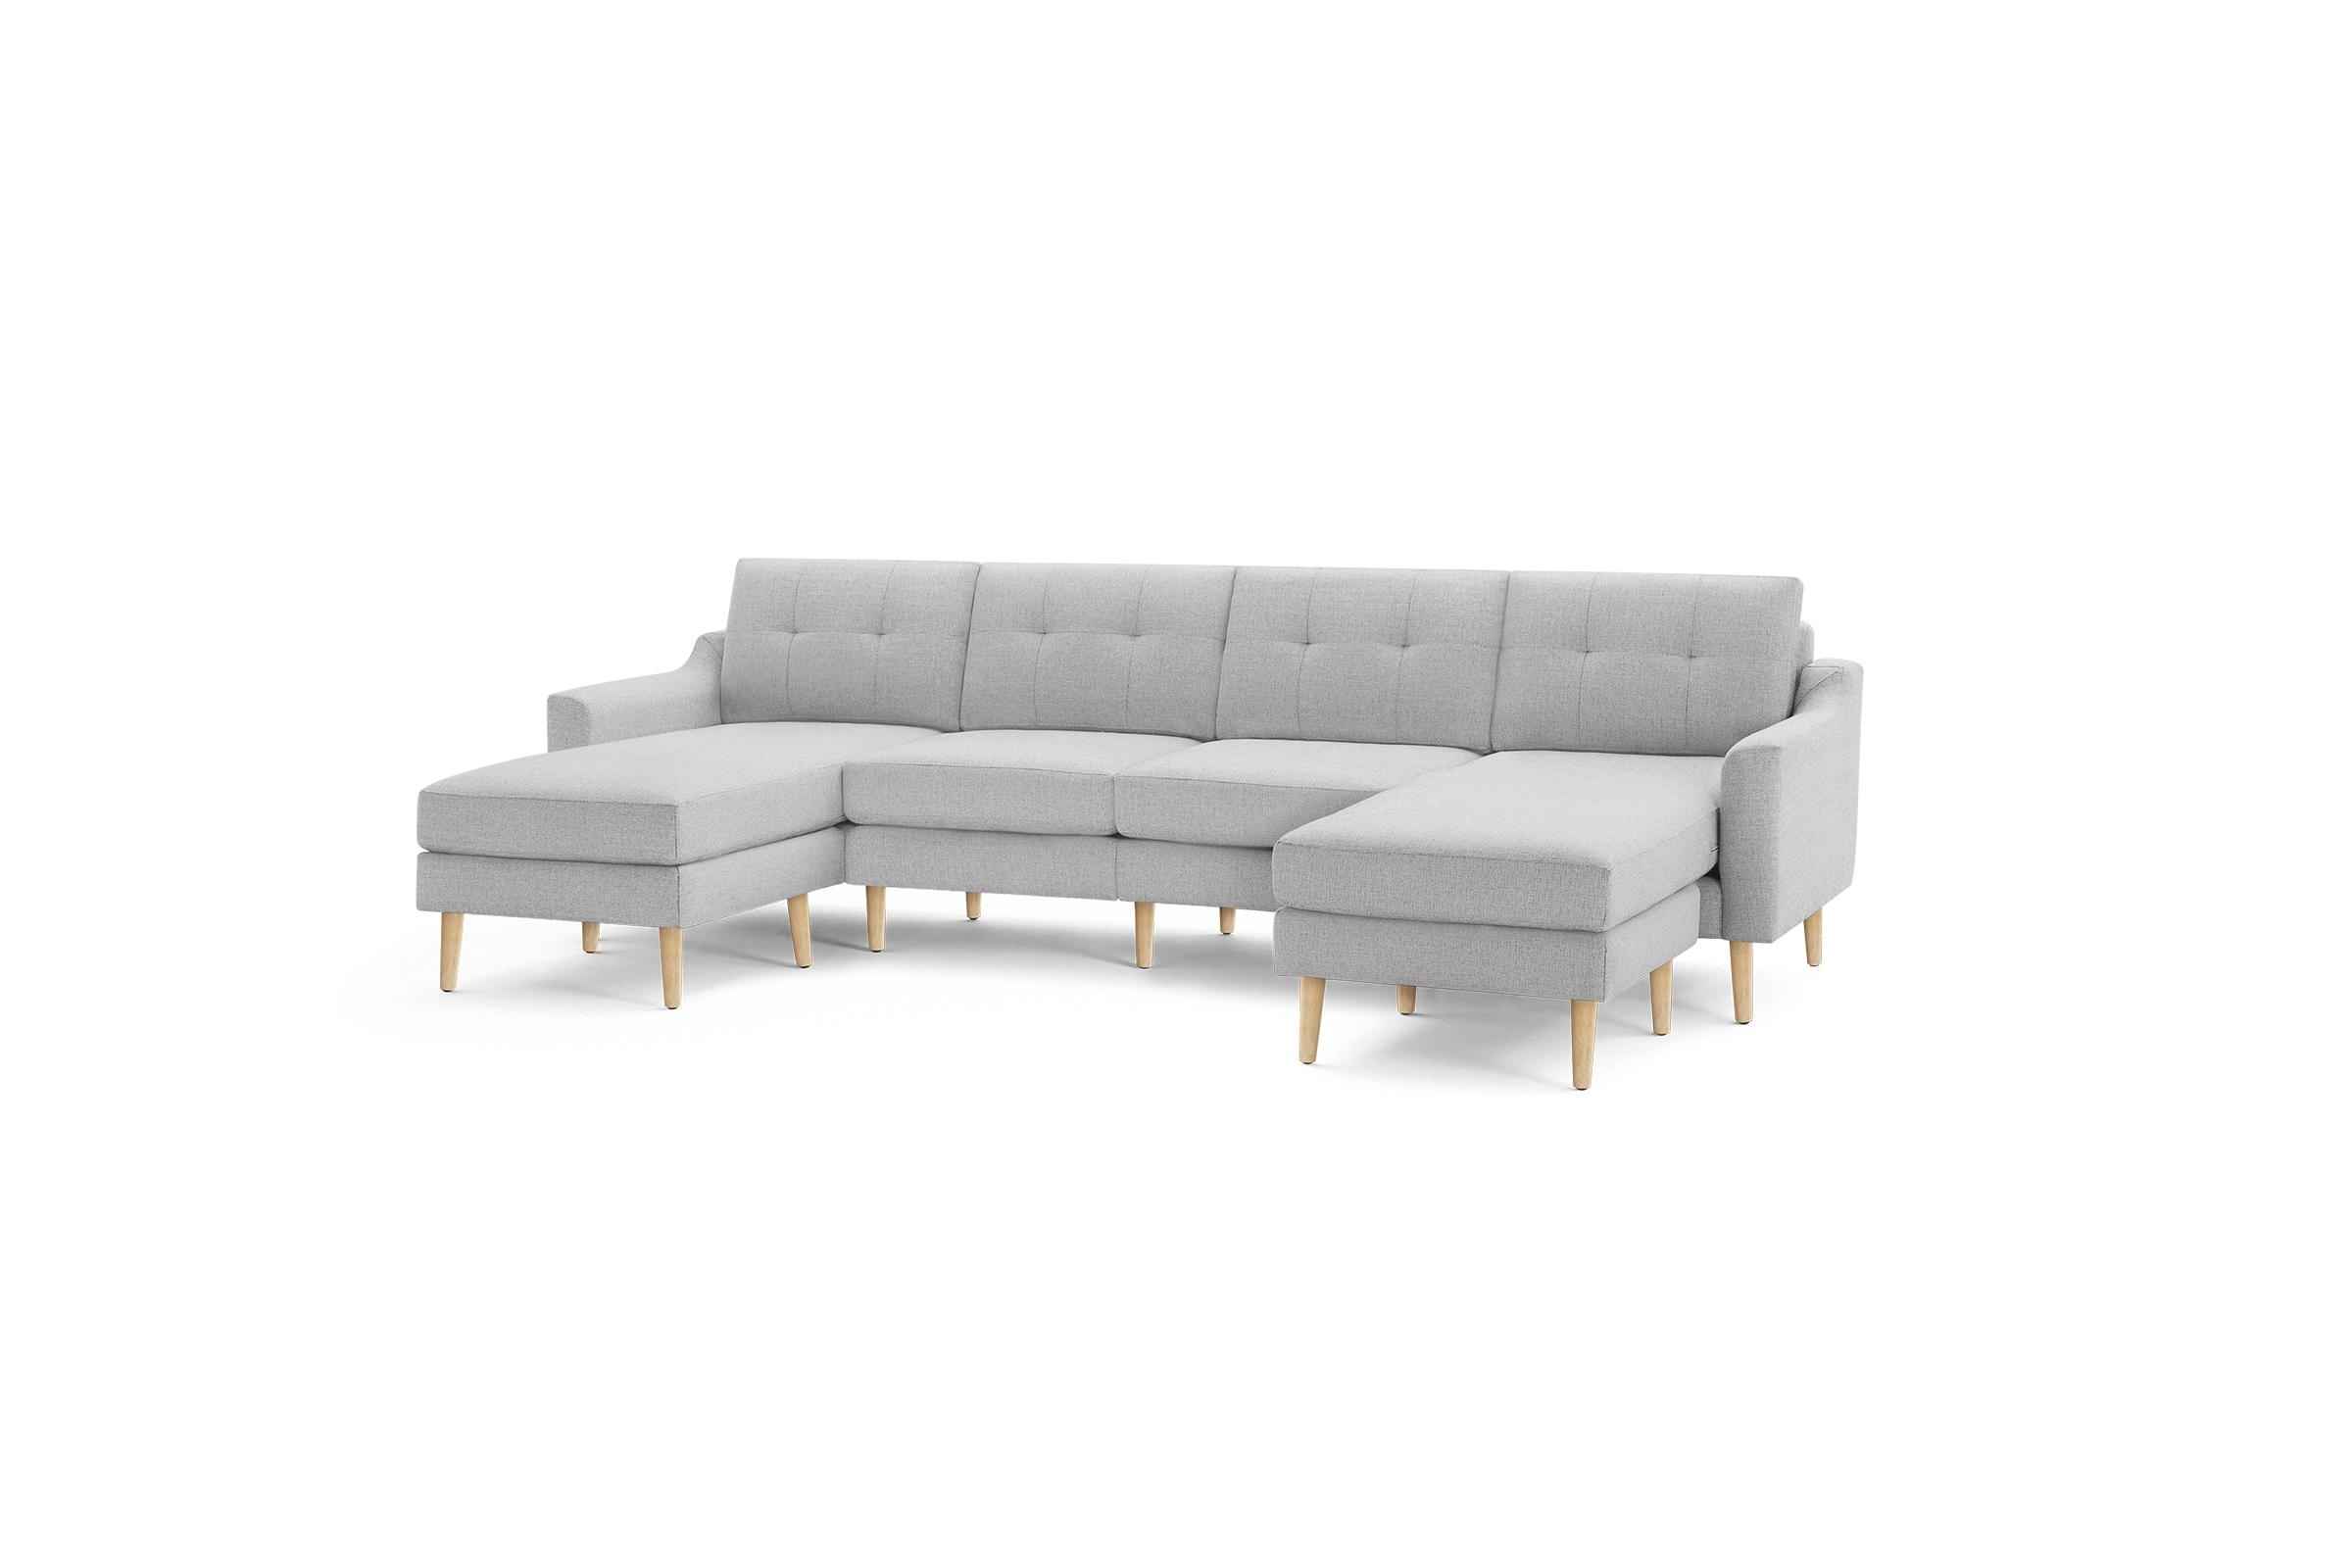 Nomad Double Chaise Sectional in Crushed Gravel, Leg Finish: OakLegs - Image 0